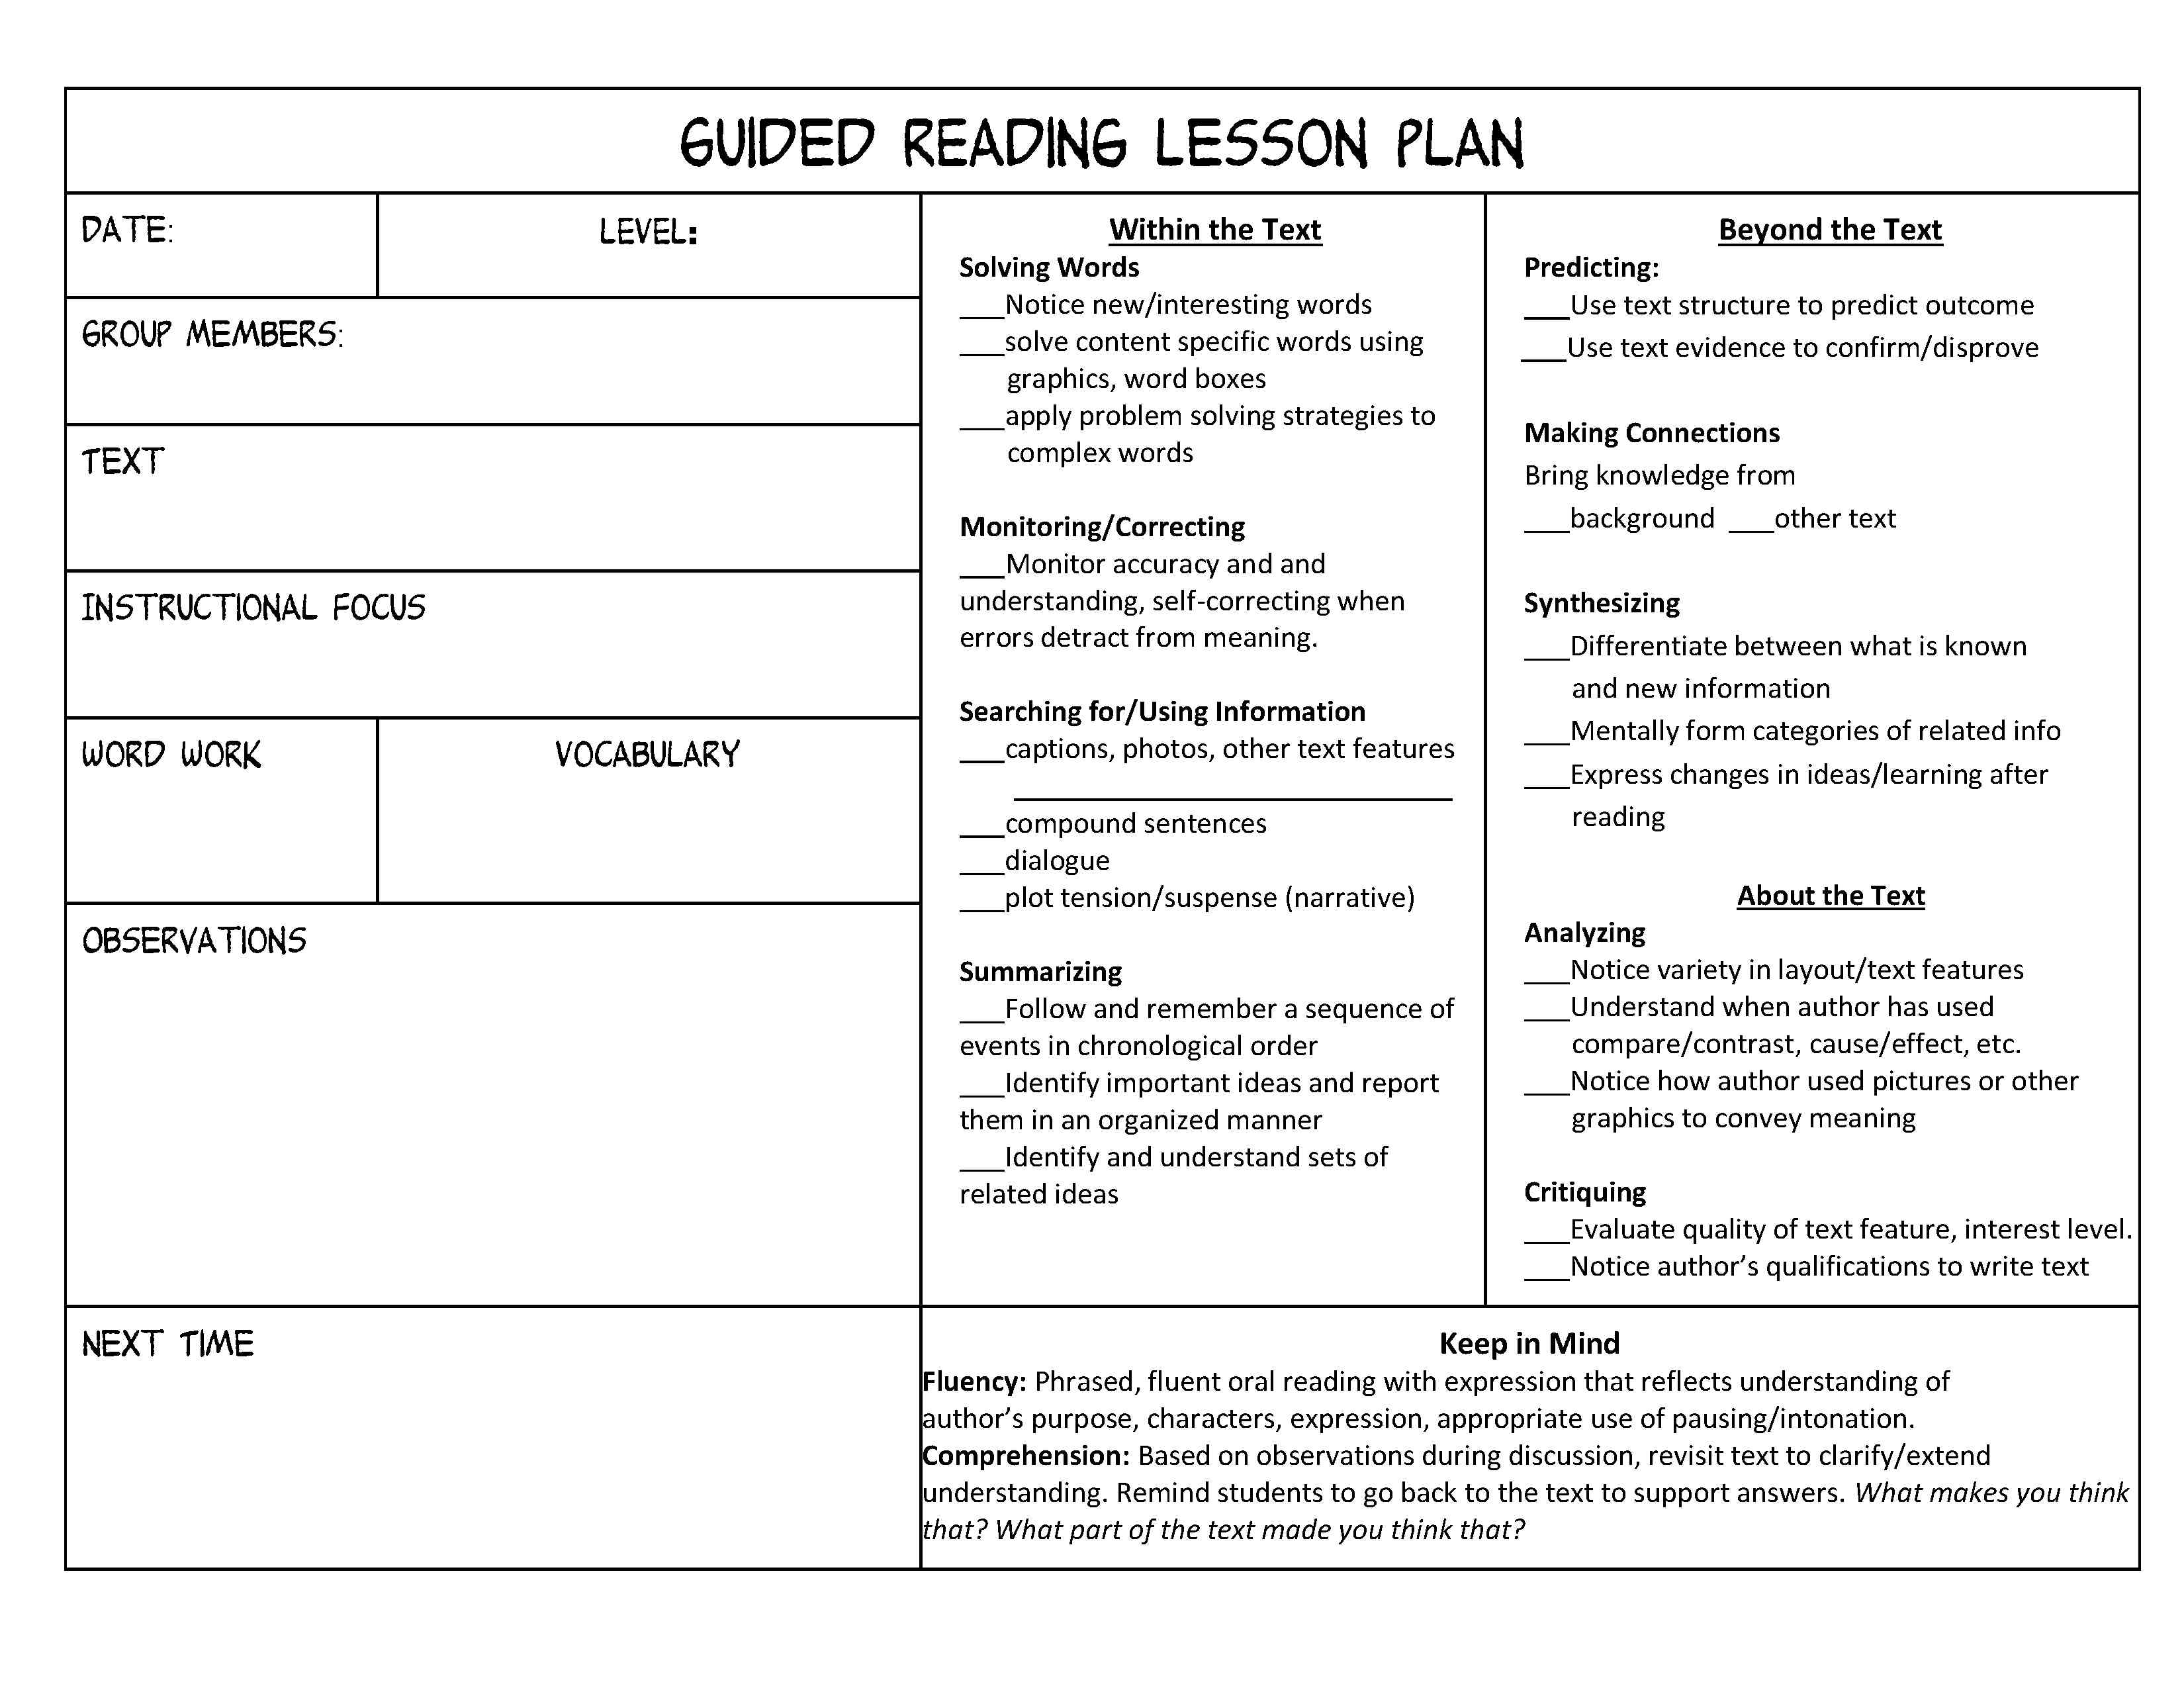 Guided Reading Lesson Plan Templates Image